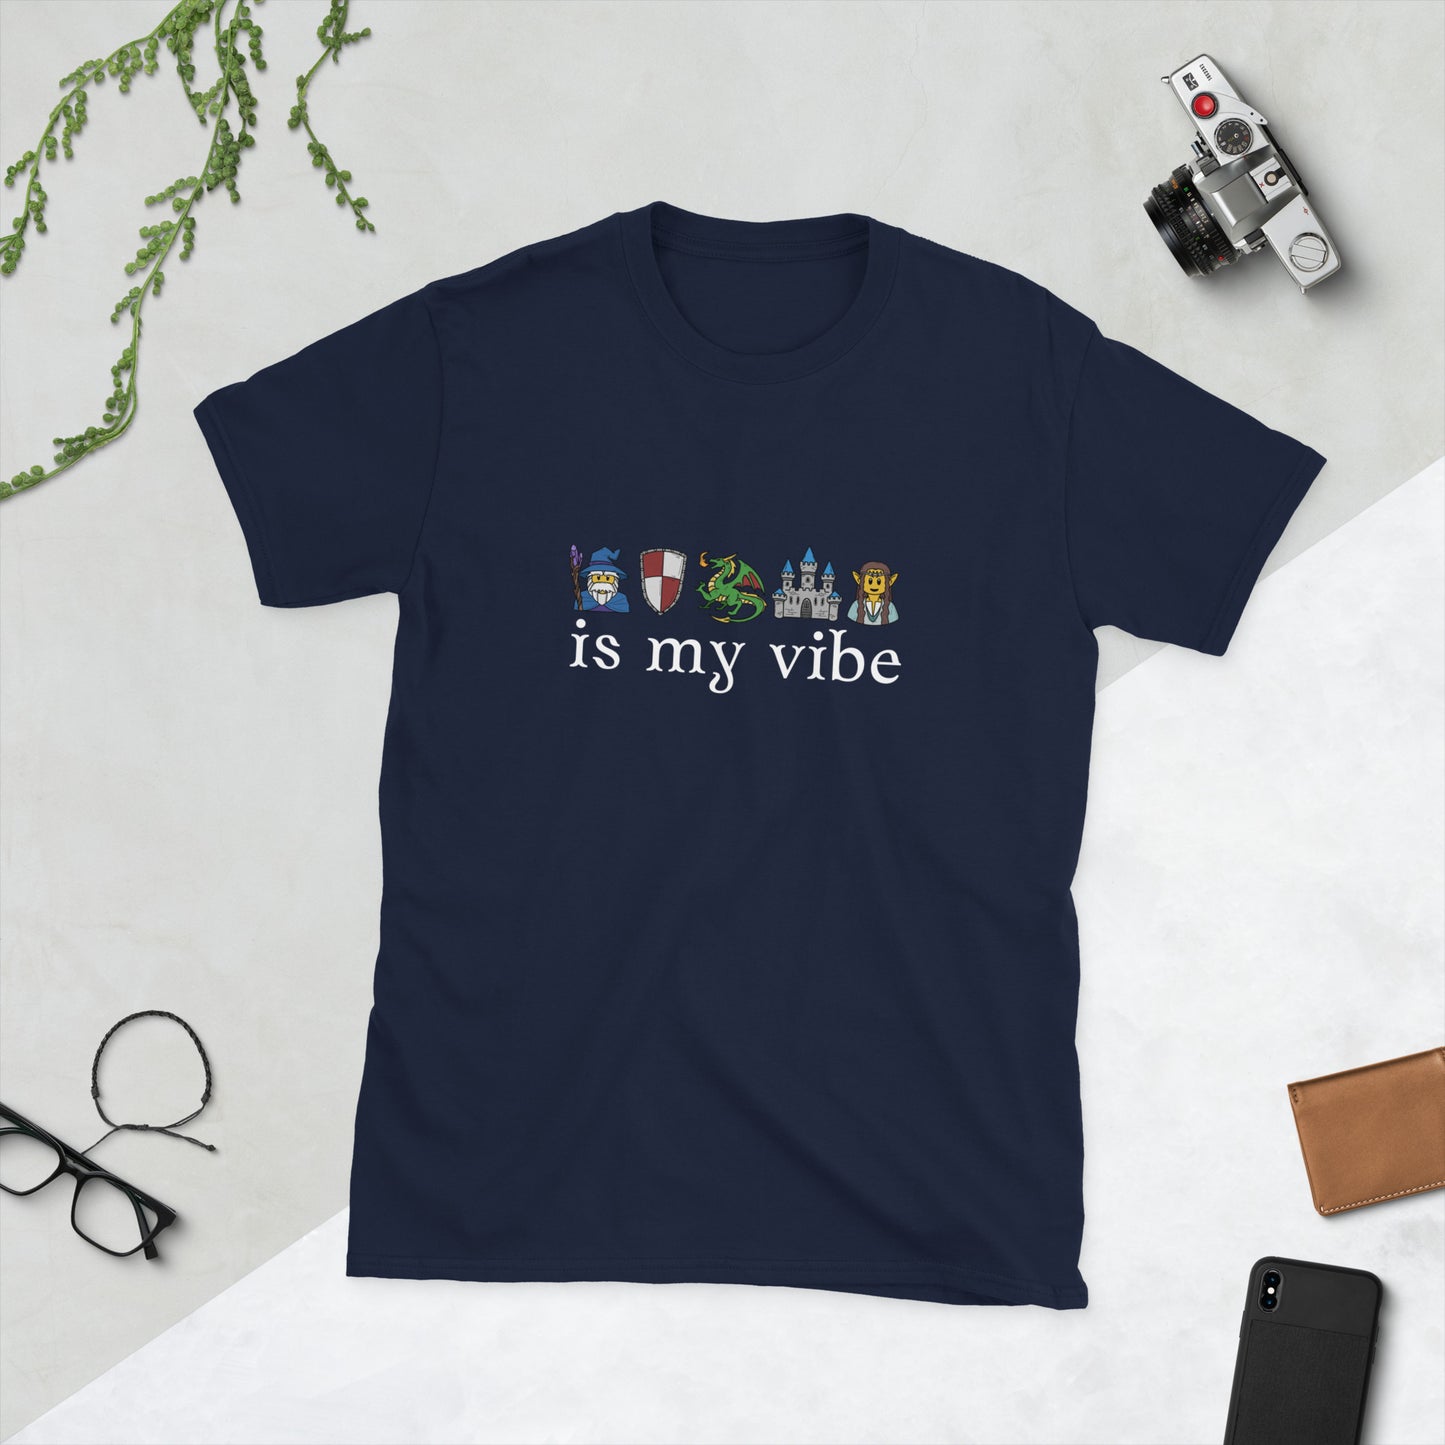 Fantasy is my vibe, medieval emoticon style Short-Sleeve Unisex T-Shirt  Level 1 Gamers Navy S 